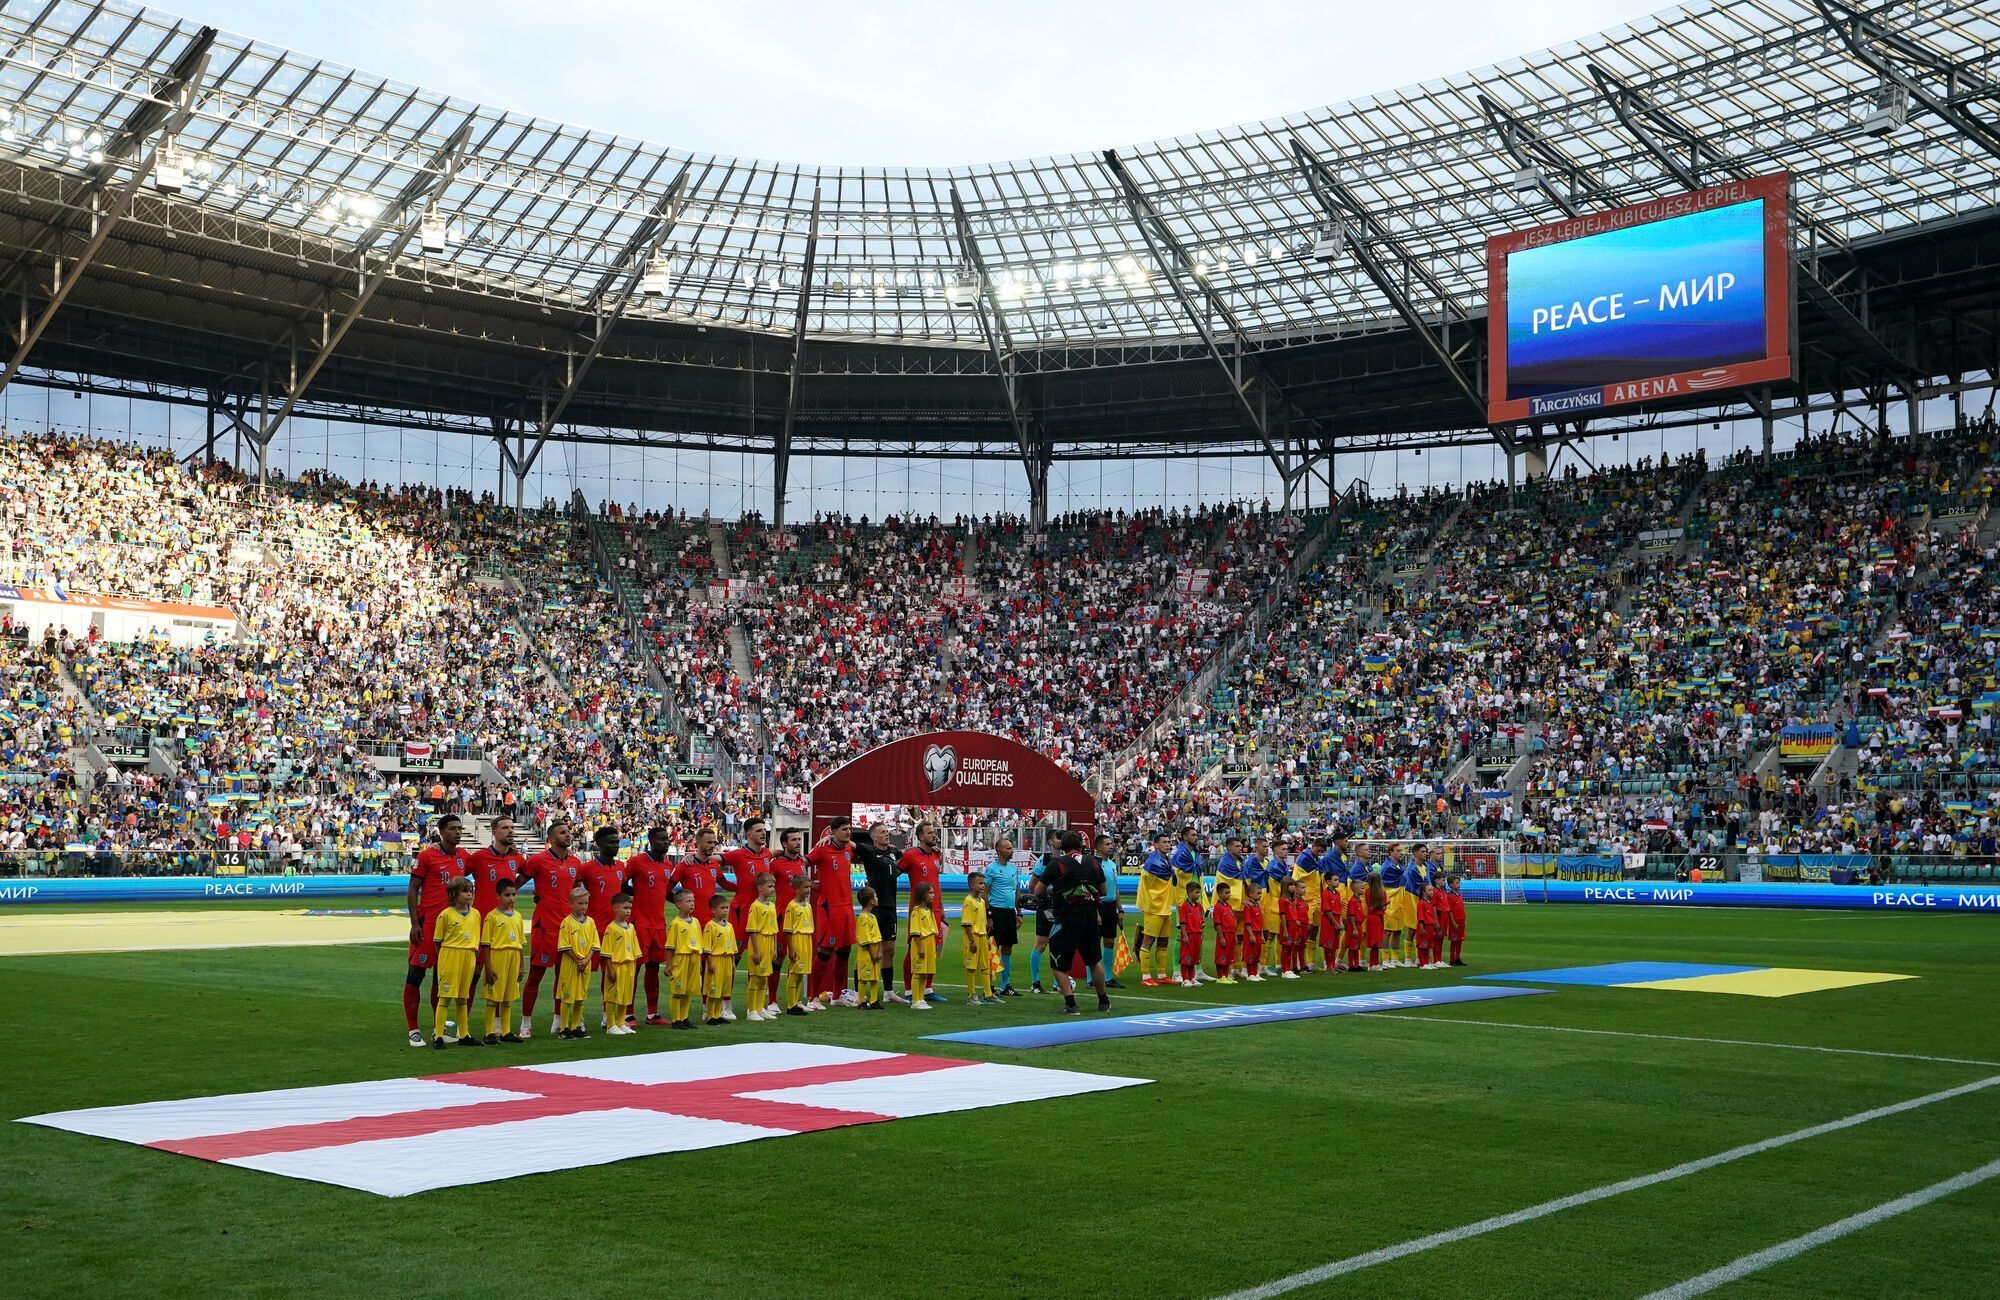 Russian fans tried to hound the Ukrainian national team after the game with England, but something went wrong